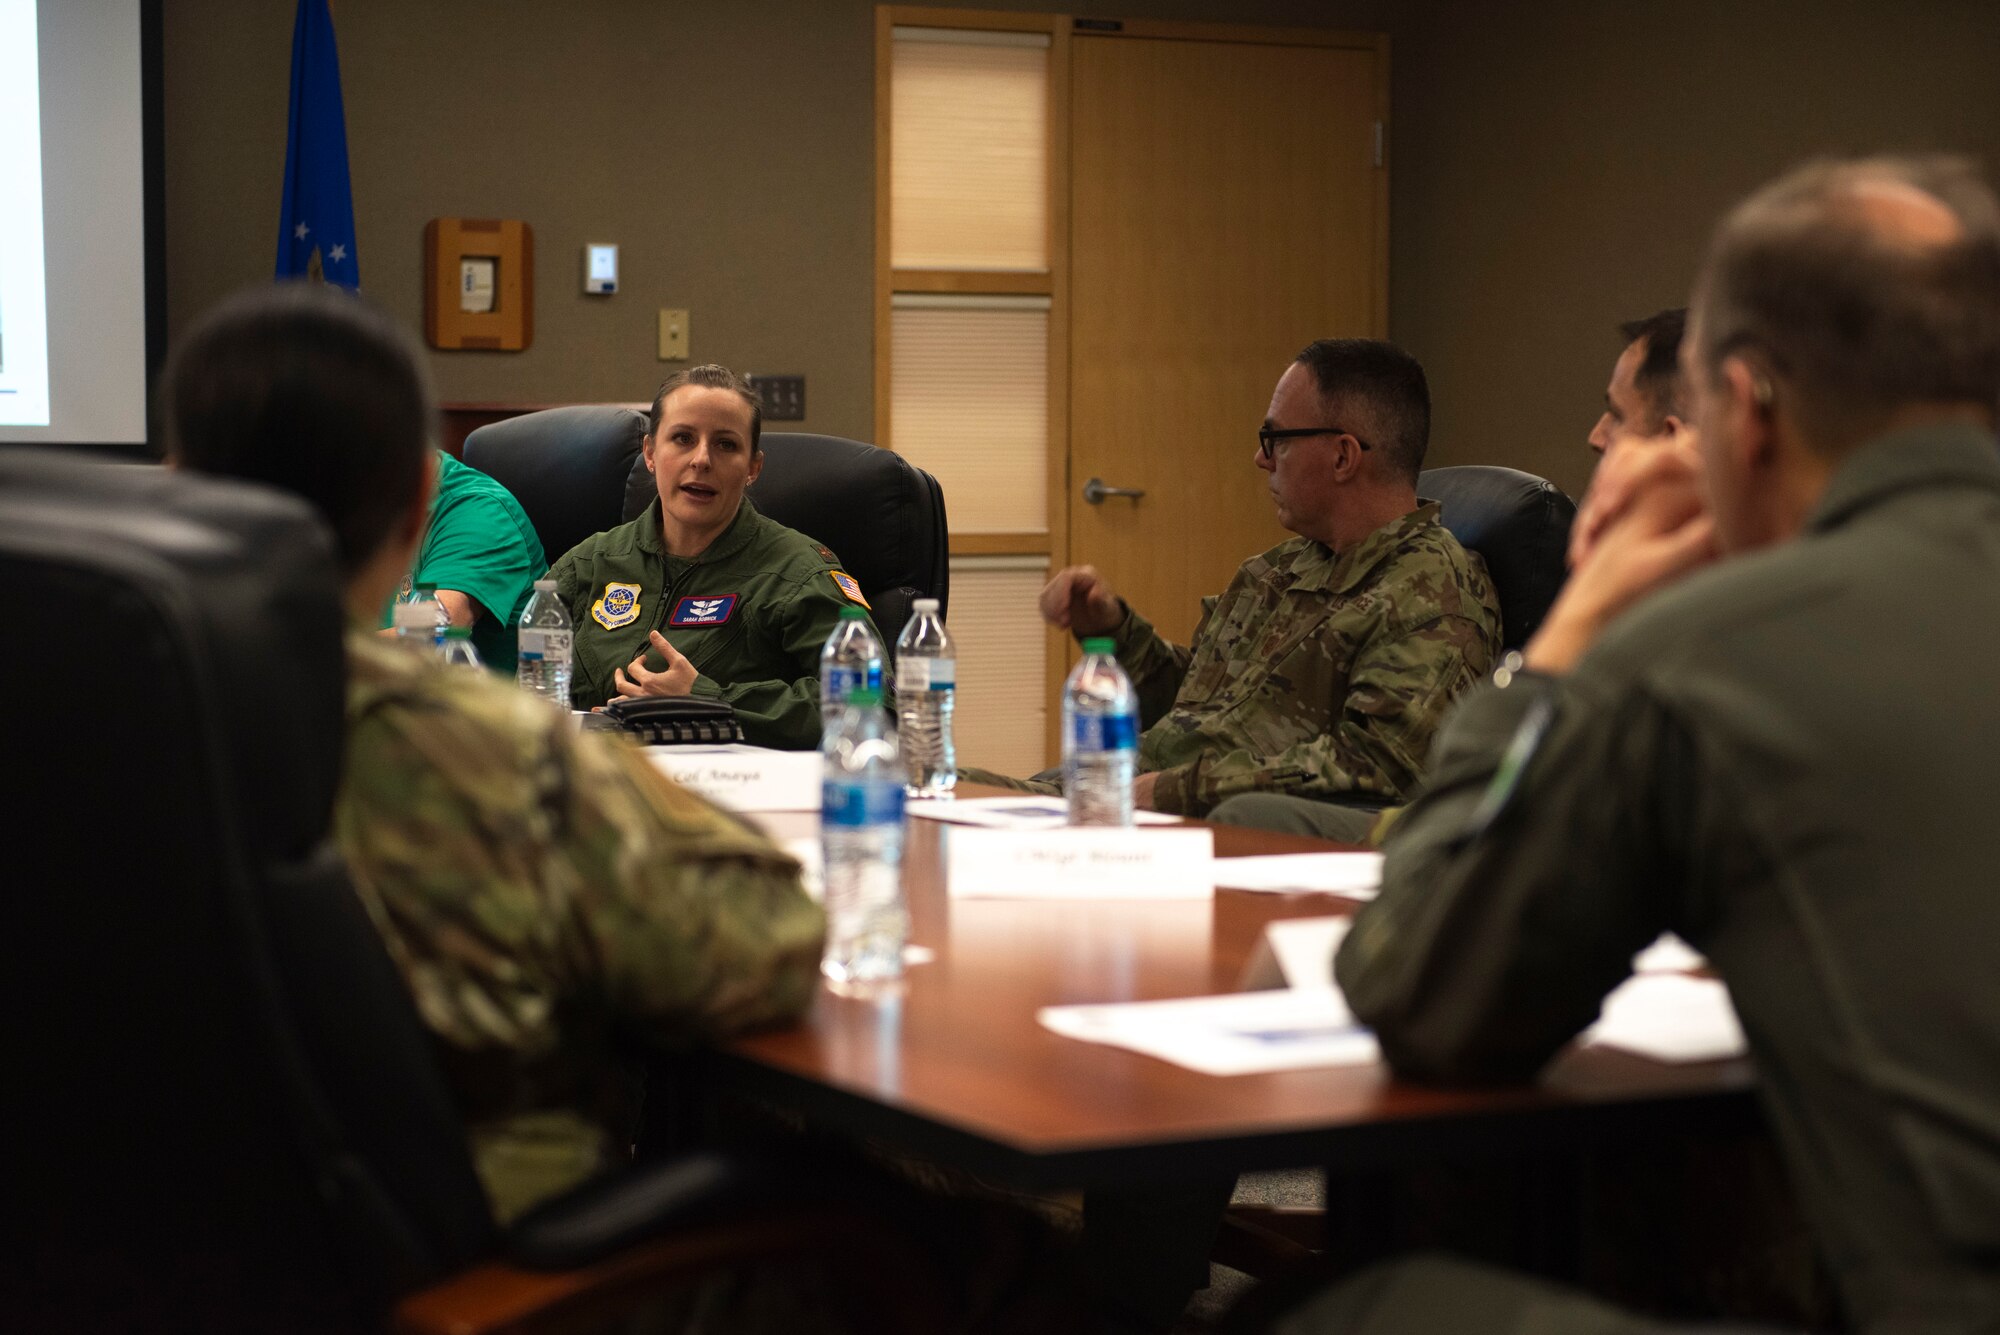 U.S. Air Force Maj. Gen. Corey Martin, 18th Air Force commander, meets with Team McChord leaders and Airmen at Joint Base Lewis-McChord, Washington, Jan. 26, 2024. The goal of Martin’s visit was to learn about Team McChord’s initiatives, accomplishments, goals for the upcoming year and to recognize exceptional performers. The tour presented Martin with insight on the 62d Airlift Wing’s readiness and ability to execute today’s global airlift mission.